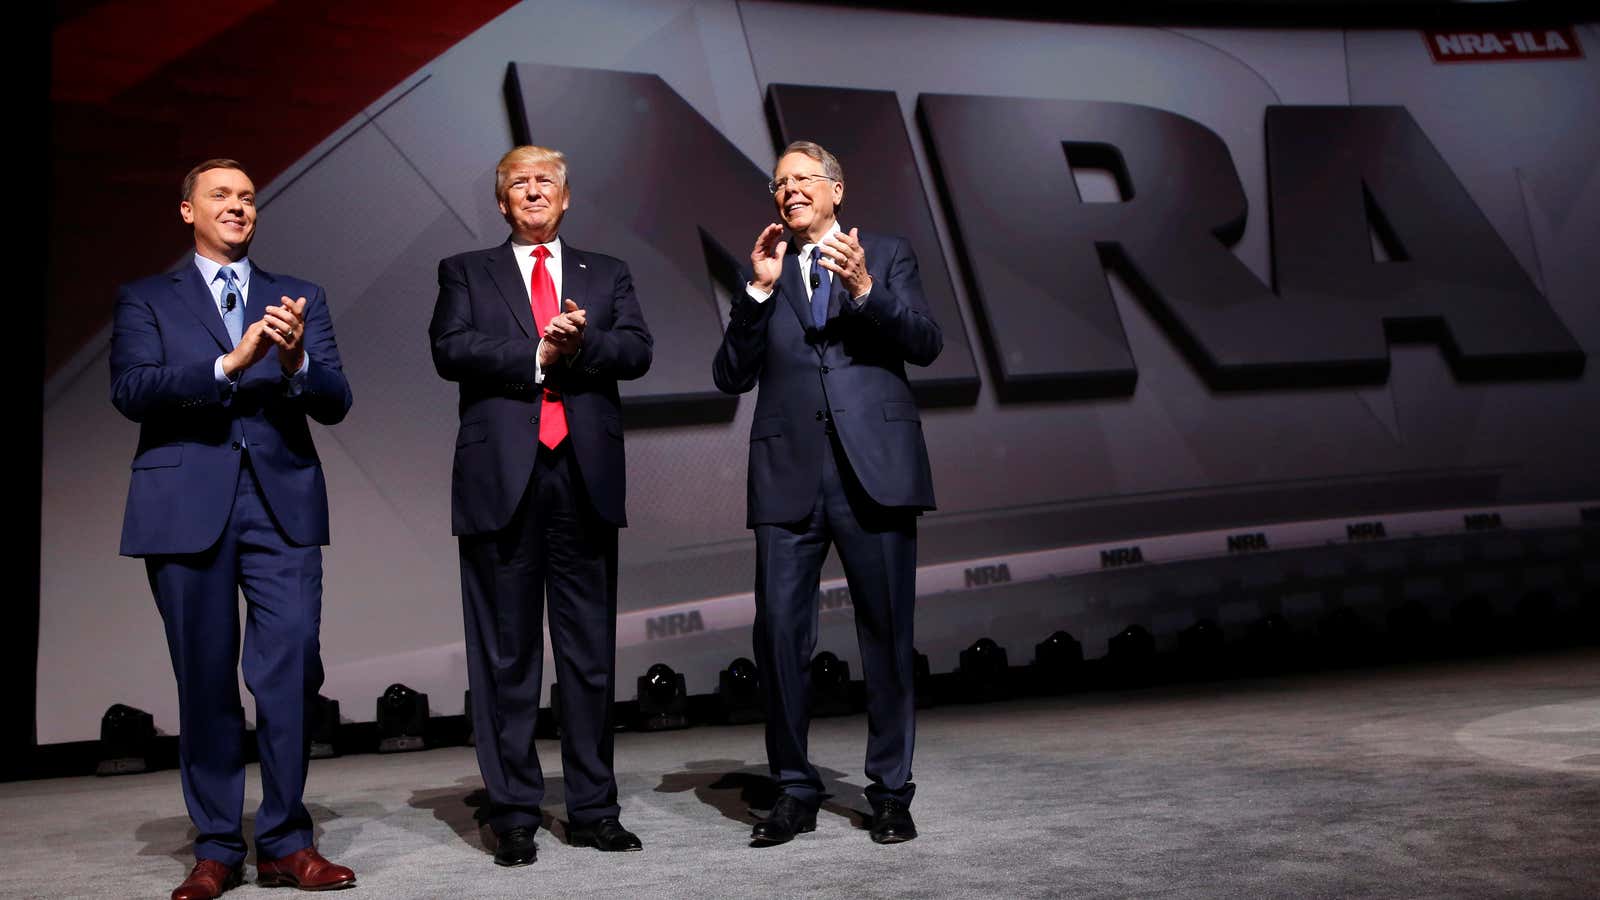 Trump speaks at a NRA leadership forum in 2017, flanked by the group’s executive director Chris Cox (L) and CEO Wayne LaPierre (R).